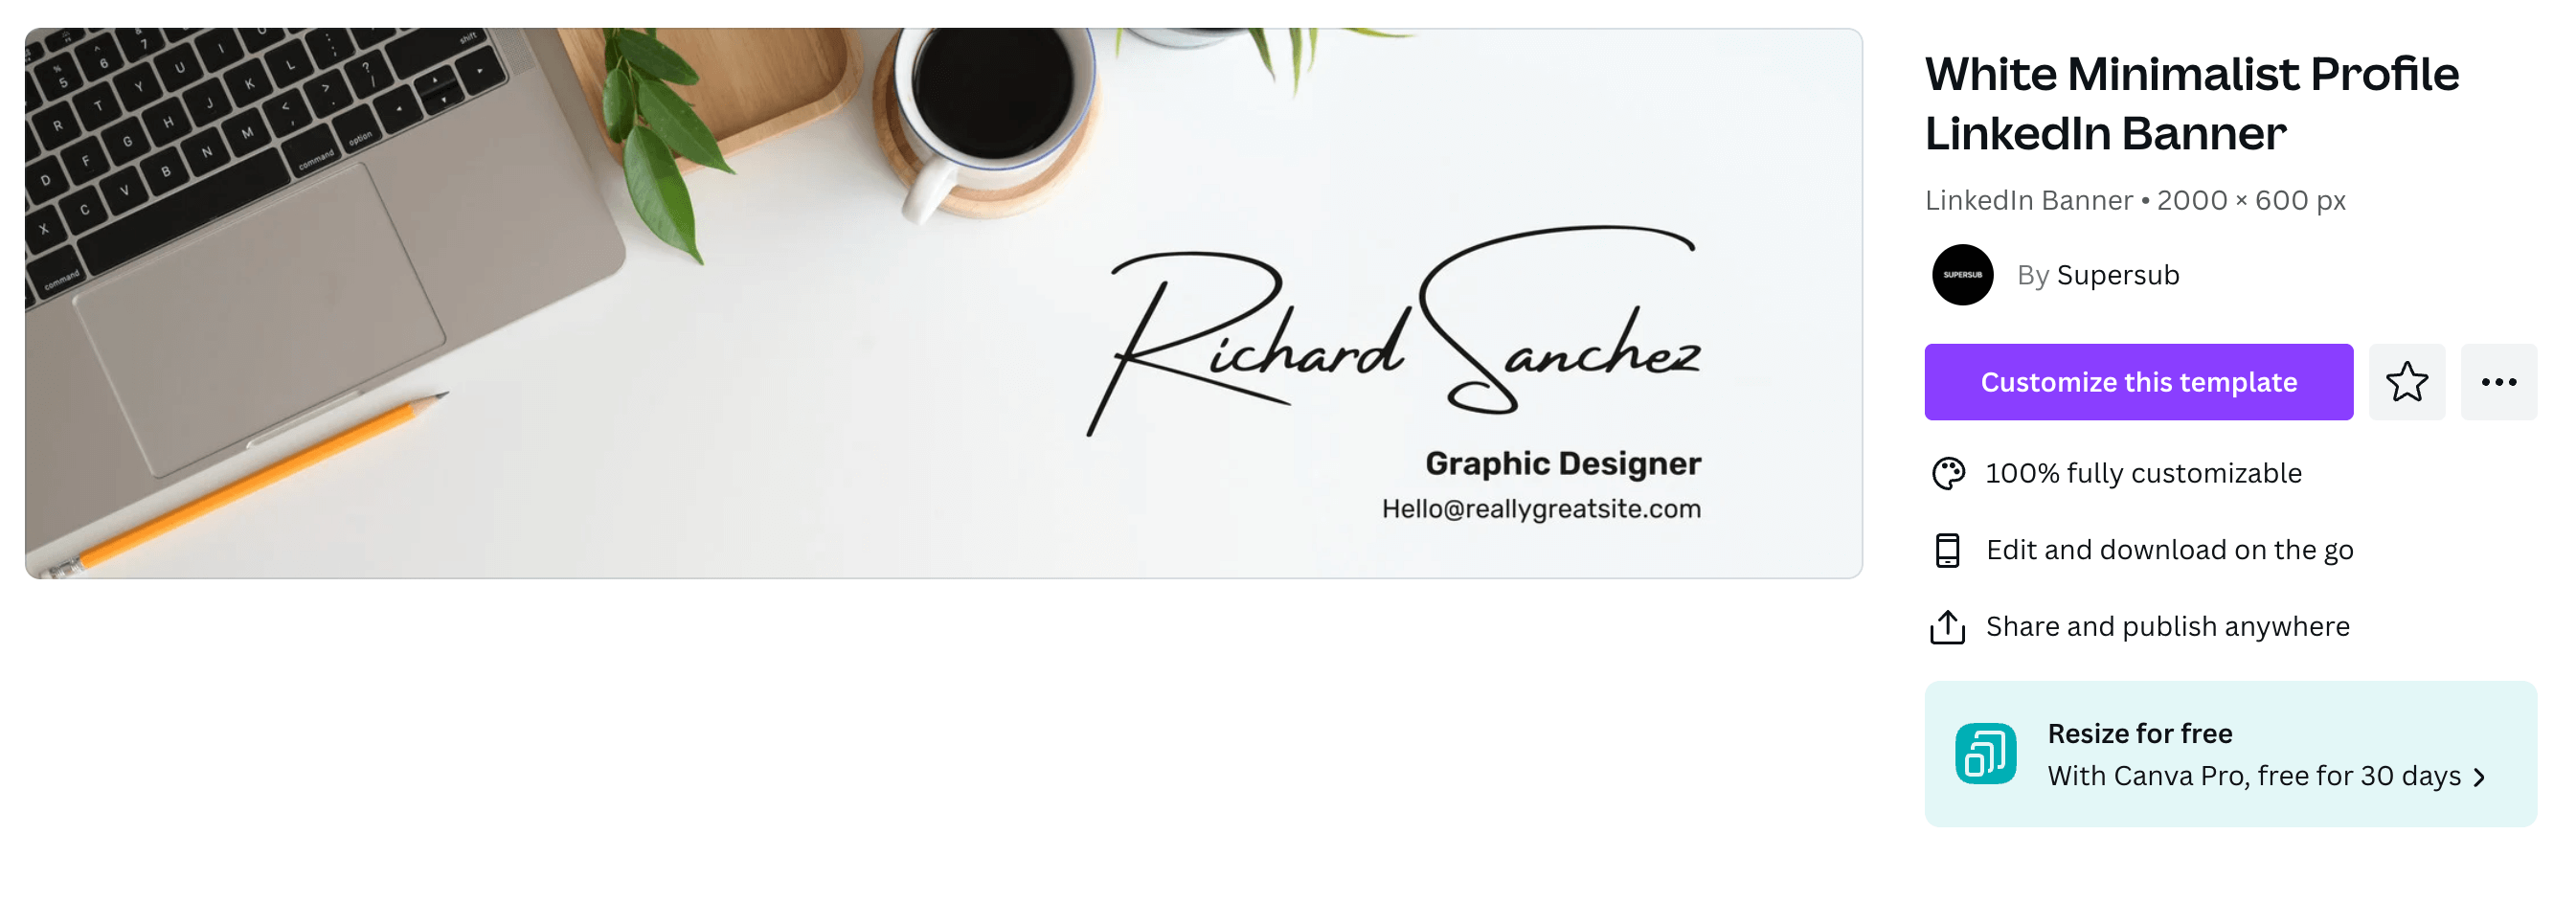 A LinkedIn banner featuring a workstation scene from above and text that reads "Richard Sanchez, Graphic Designer, Hello@rellygreatsite.com"